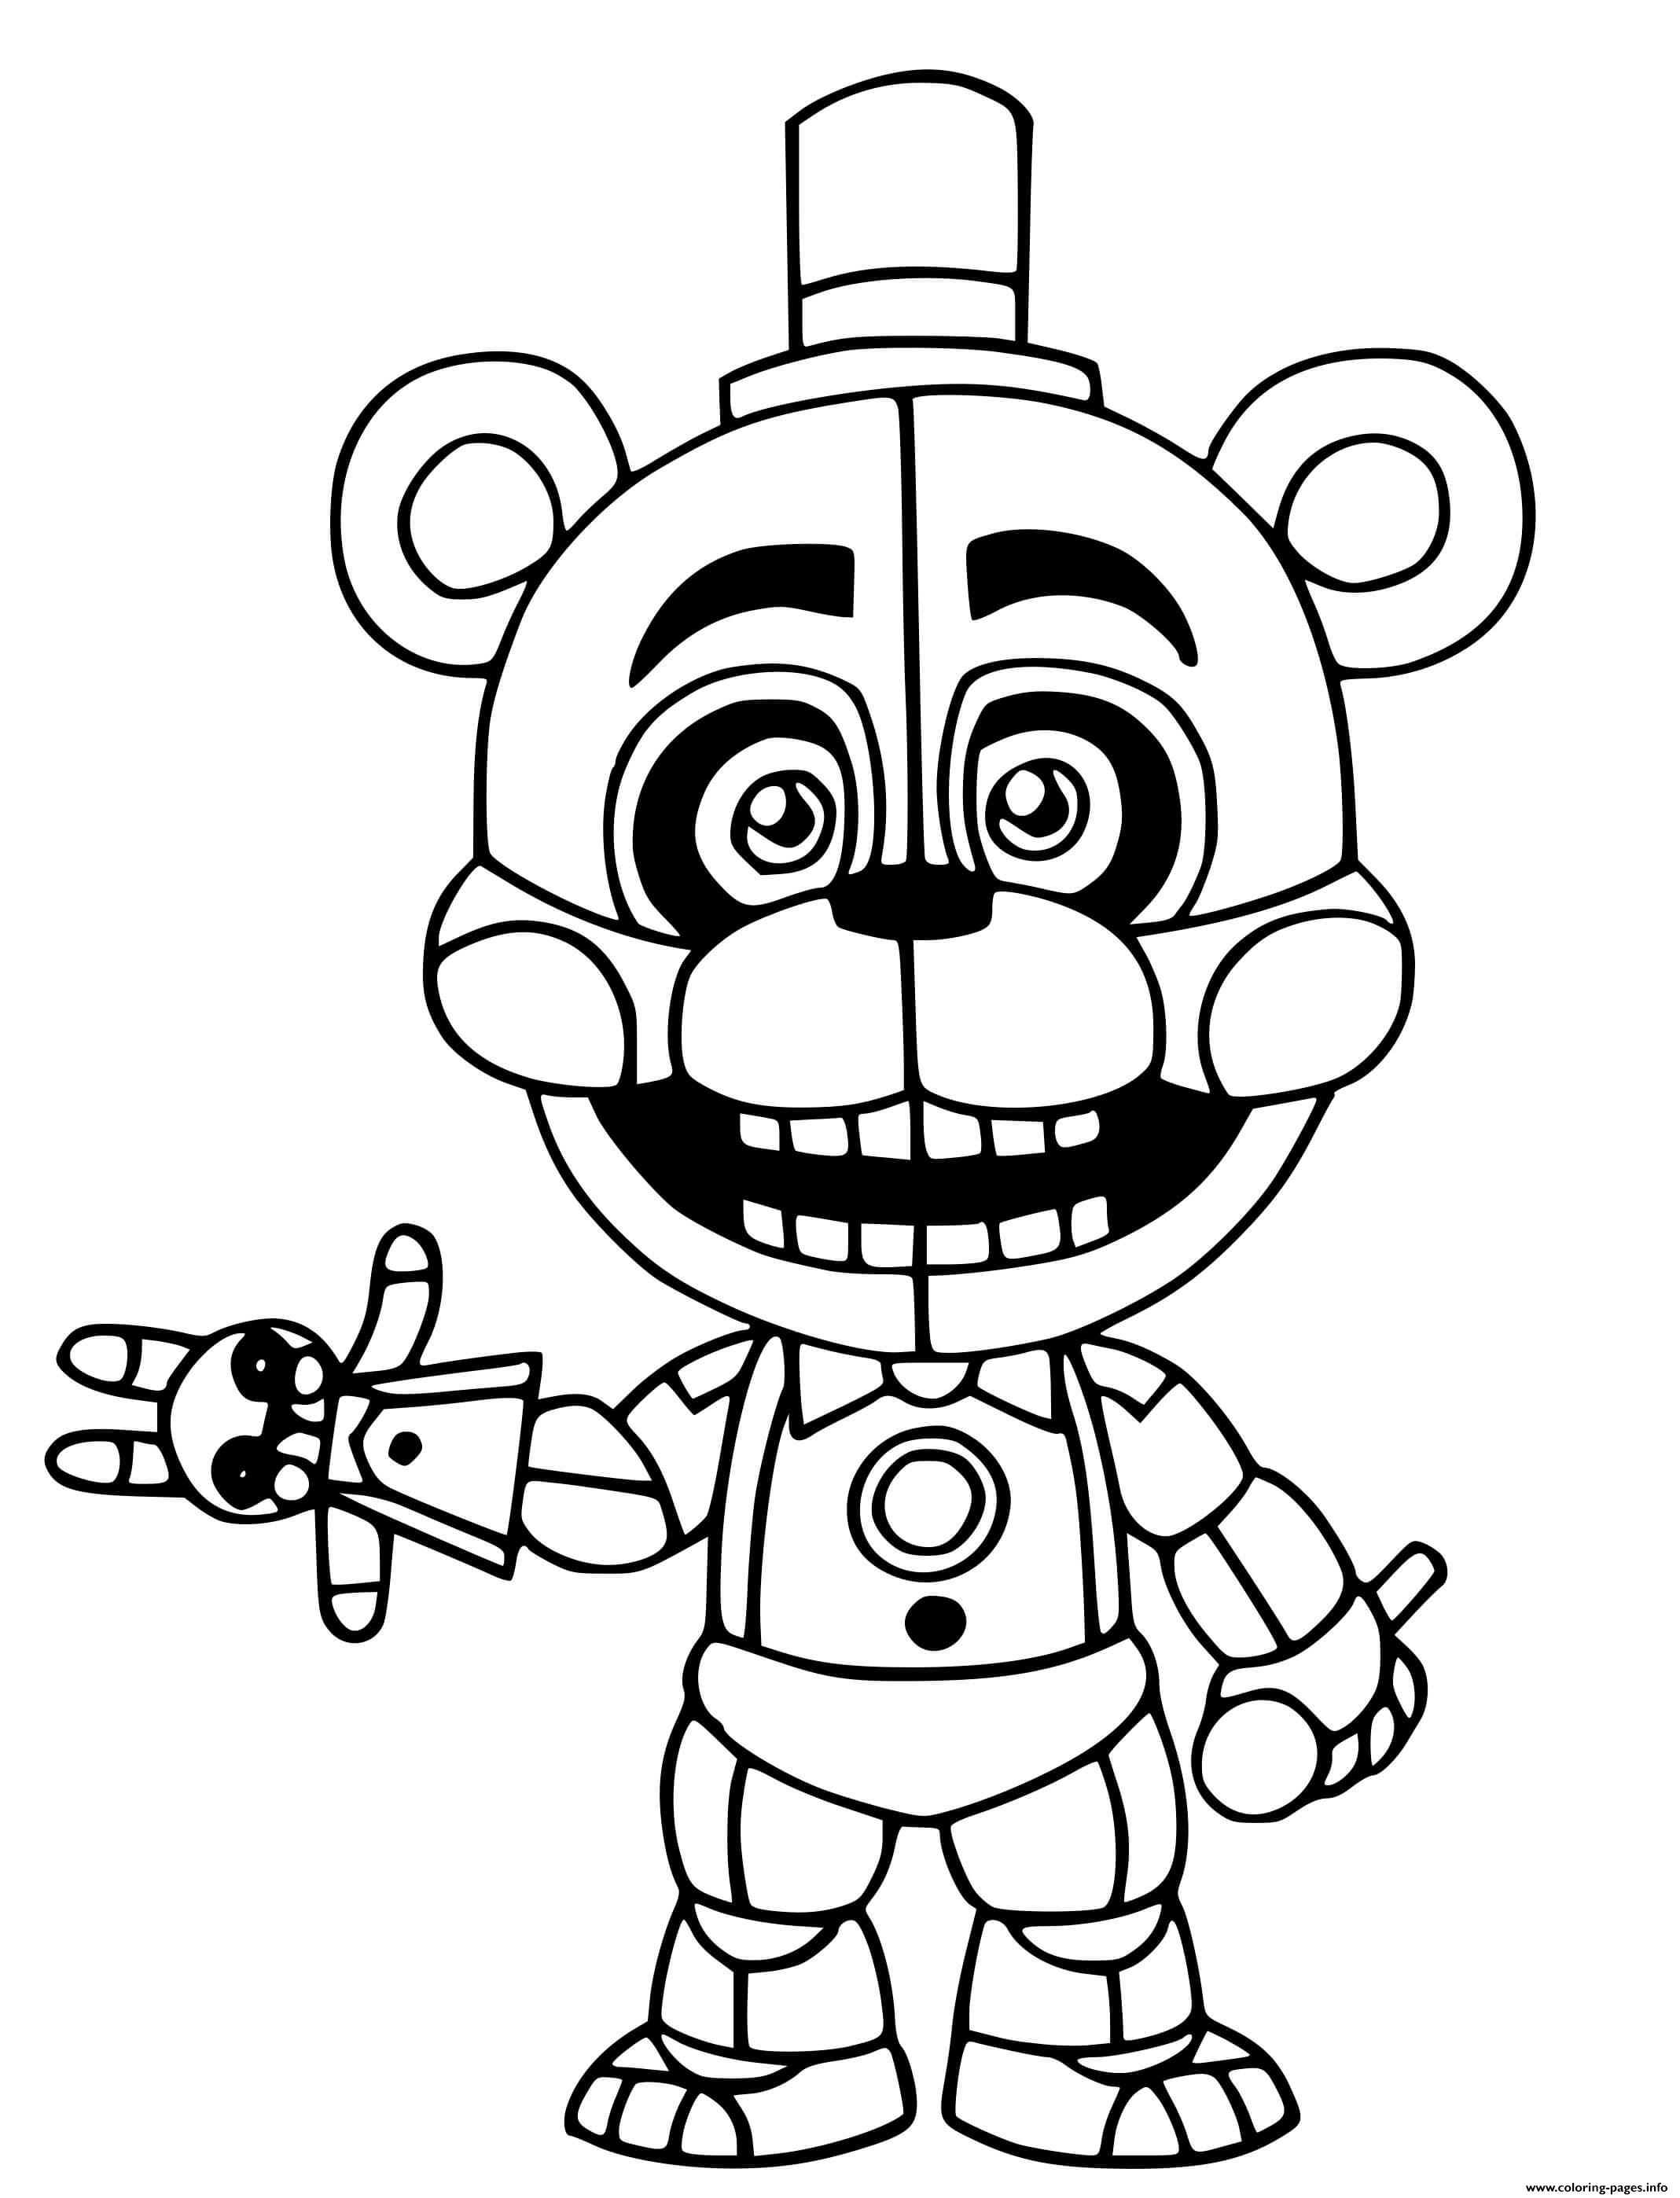 Freddy 2 Coloring Page Printable